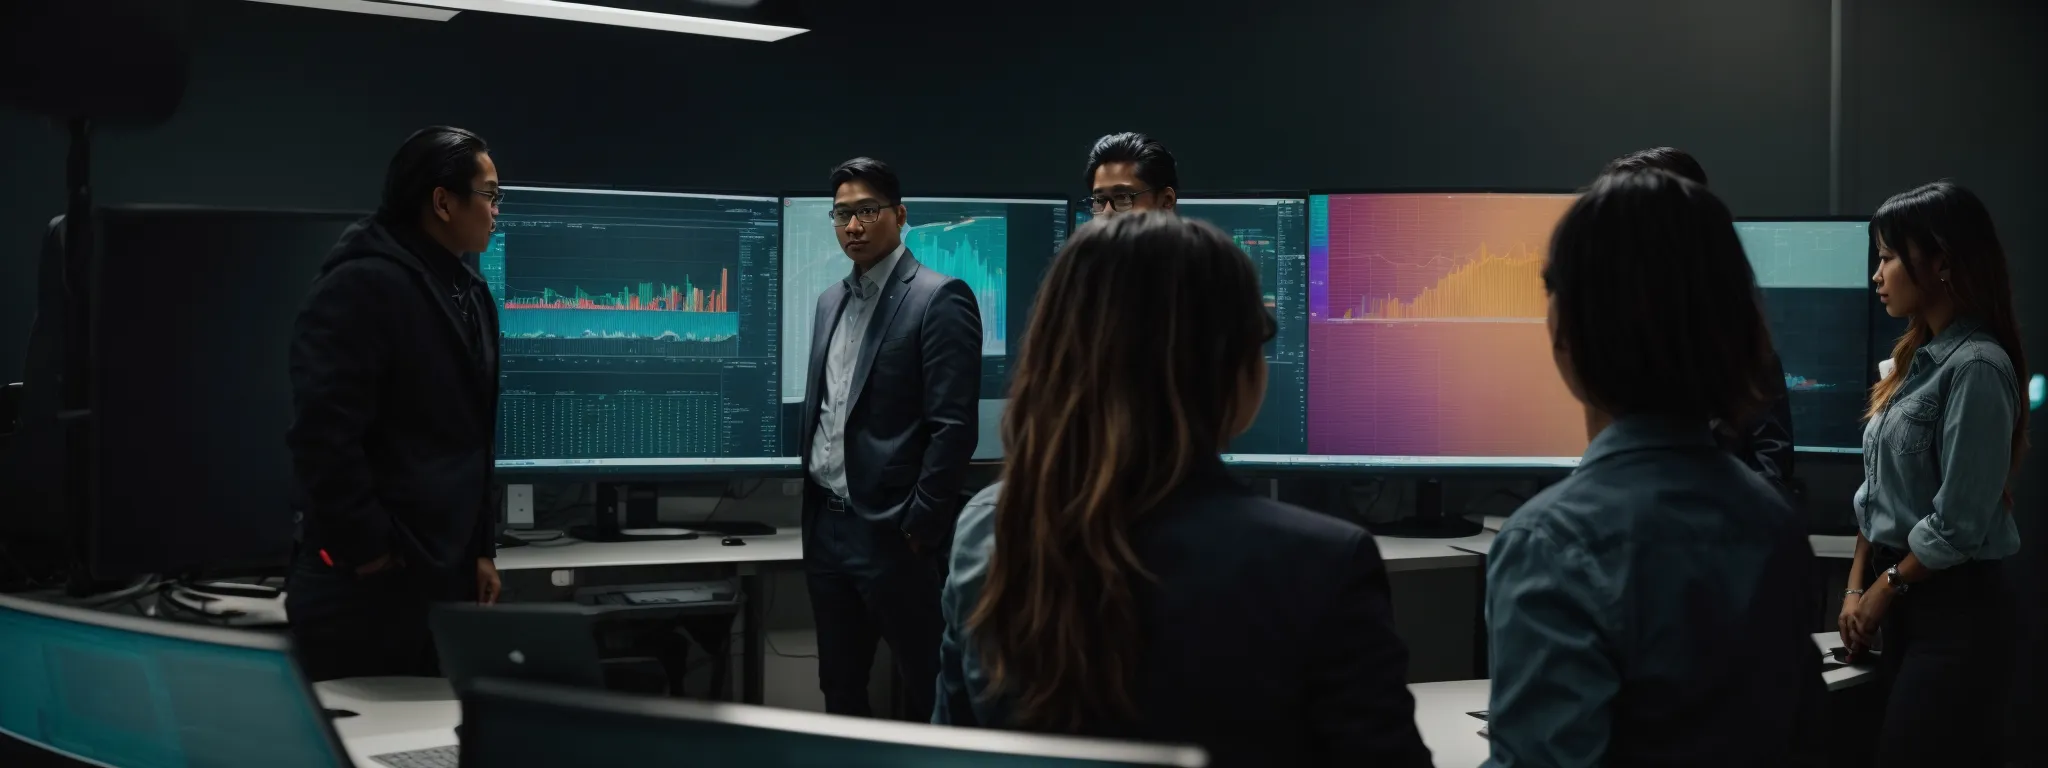 a group of diverse people gathered around a large computer screen, analyzing colorful graphs and data analytics.